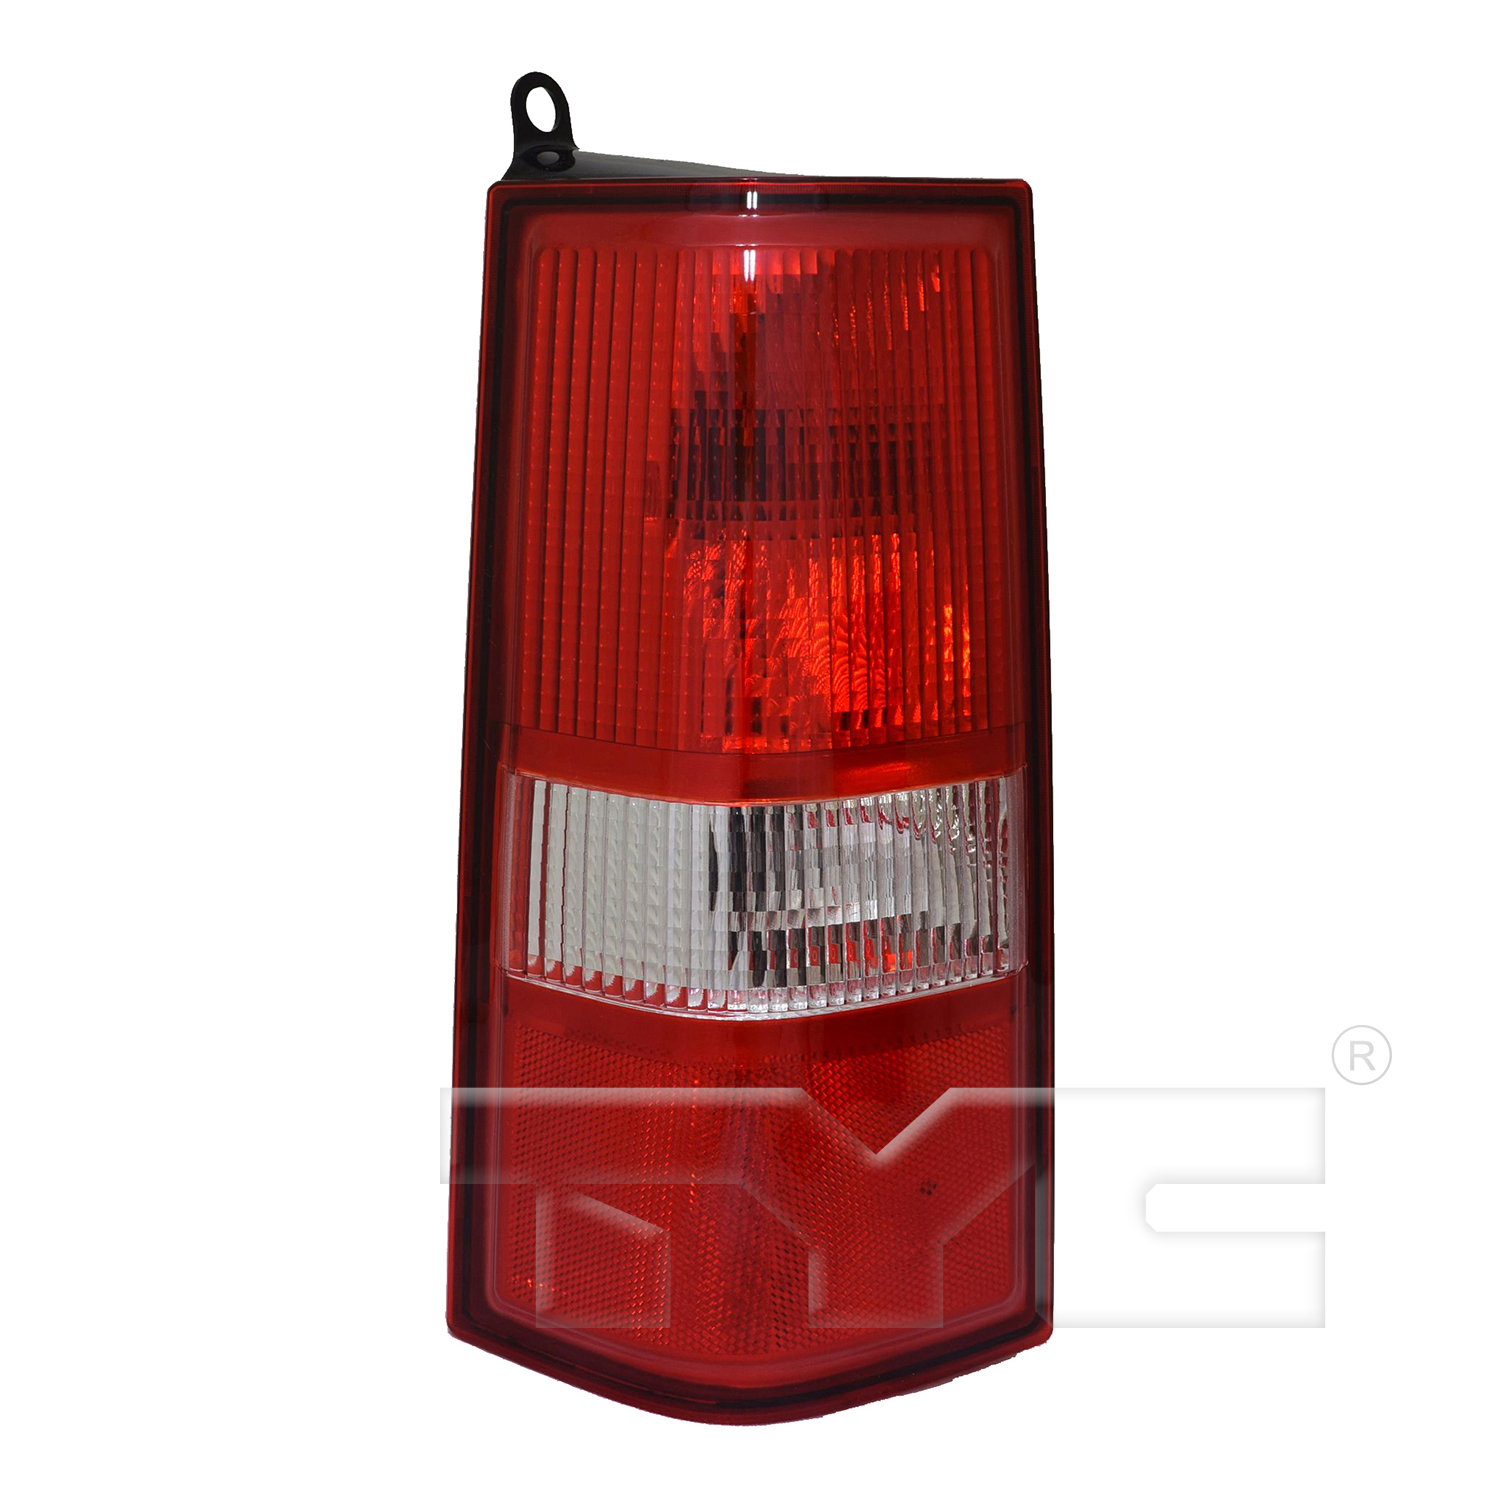 Aftermarket TAILLIGHTS for CHEVROLET - EXPRESS 1500, EXPRESS 1500,03-14,LT Taillamp assy